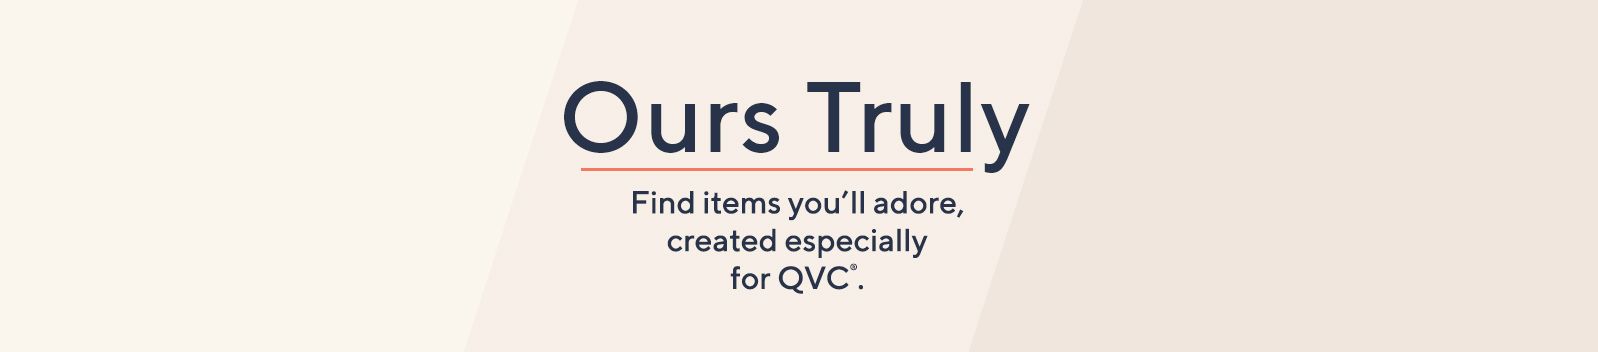 Ours Truly. Find items you'll adore, created especially for QVC®.